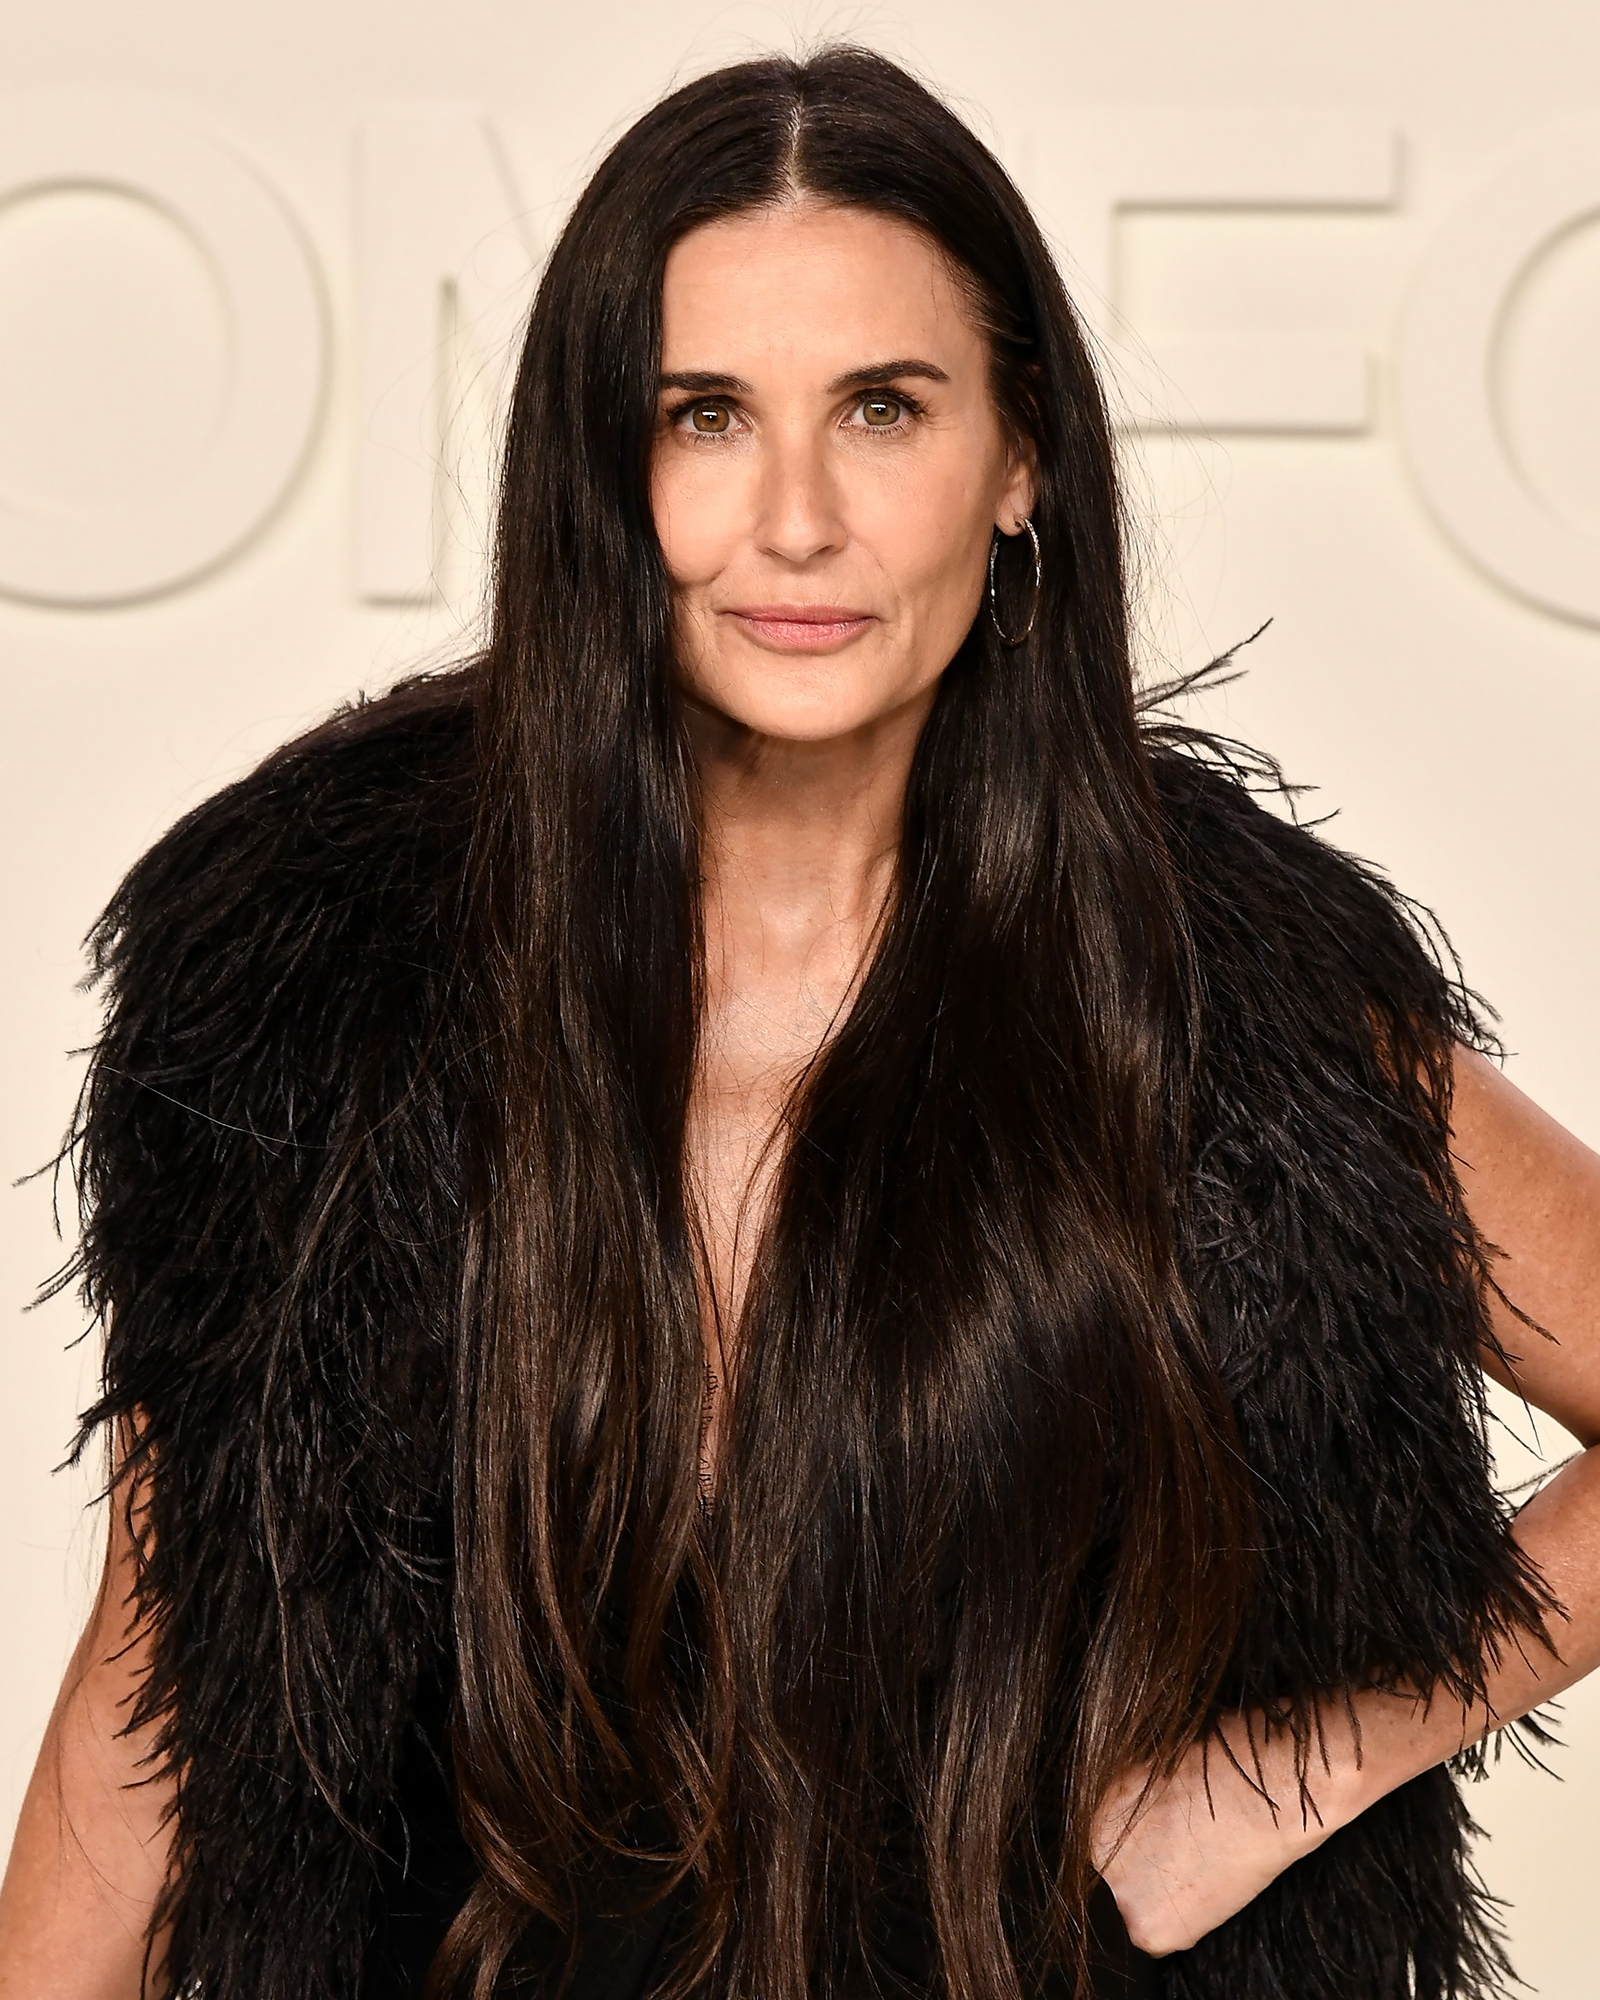 Demi Moore S Most Iconic Films Ranked - vrogue.co